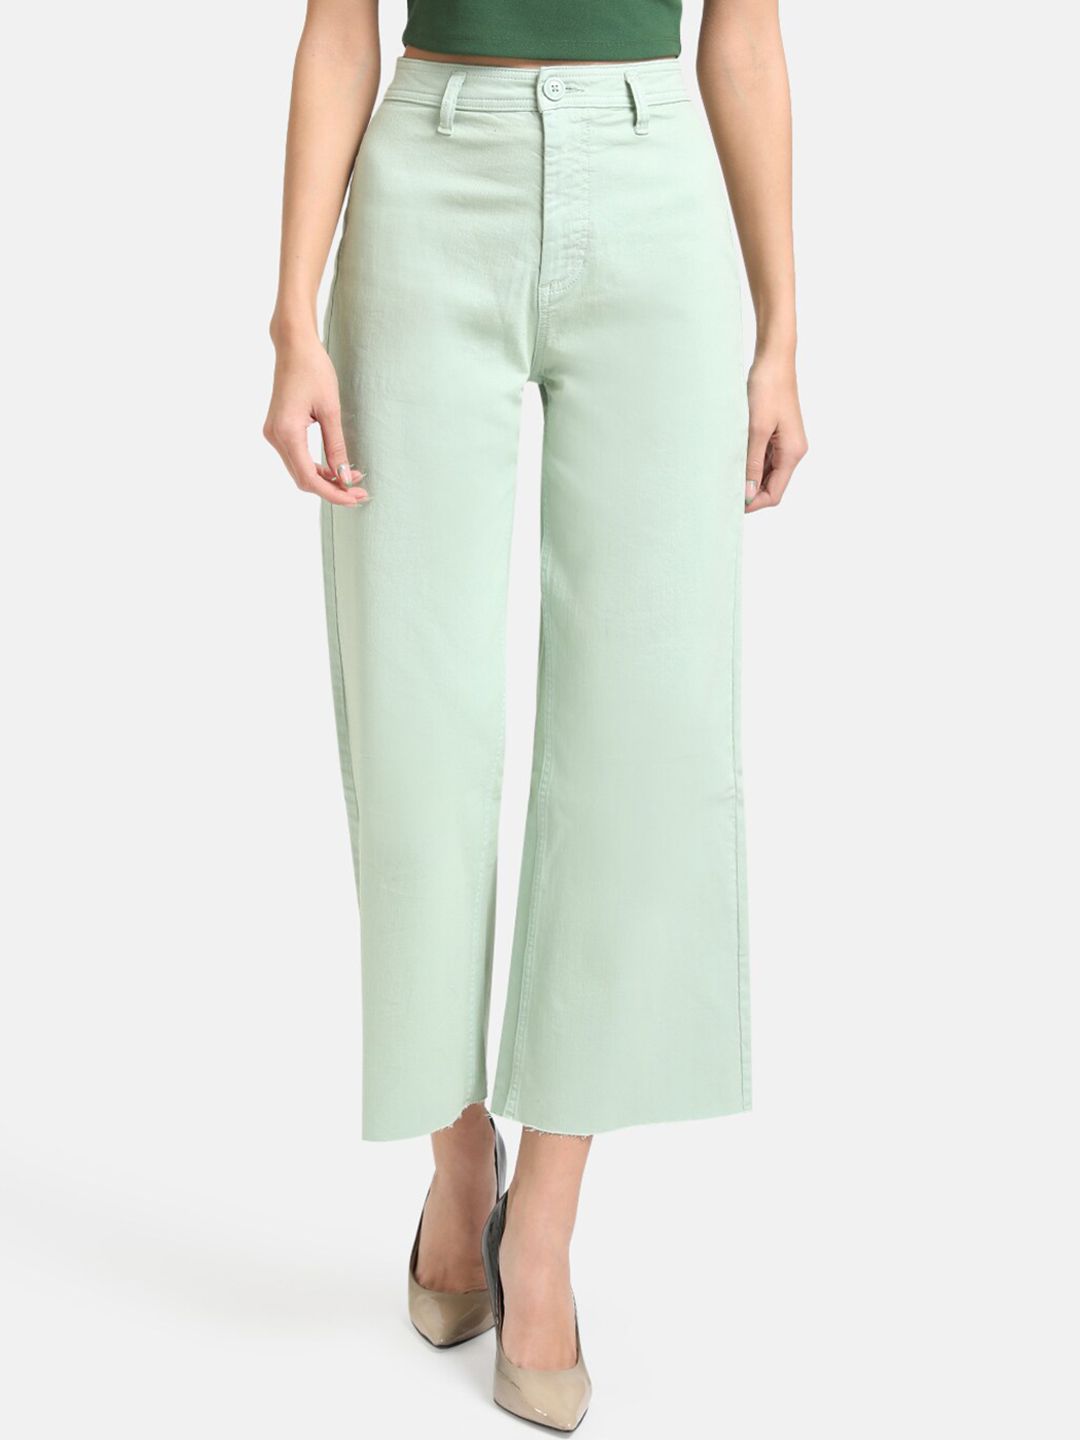 Kazo Women Mint Green Relaxed Fit High-Rise Stretchable Frayed Hem Cropped Jeans Price in India